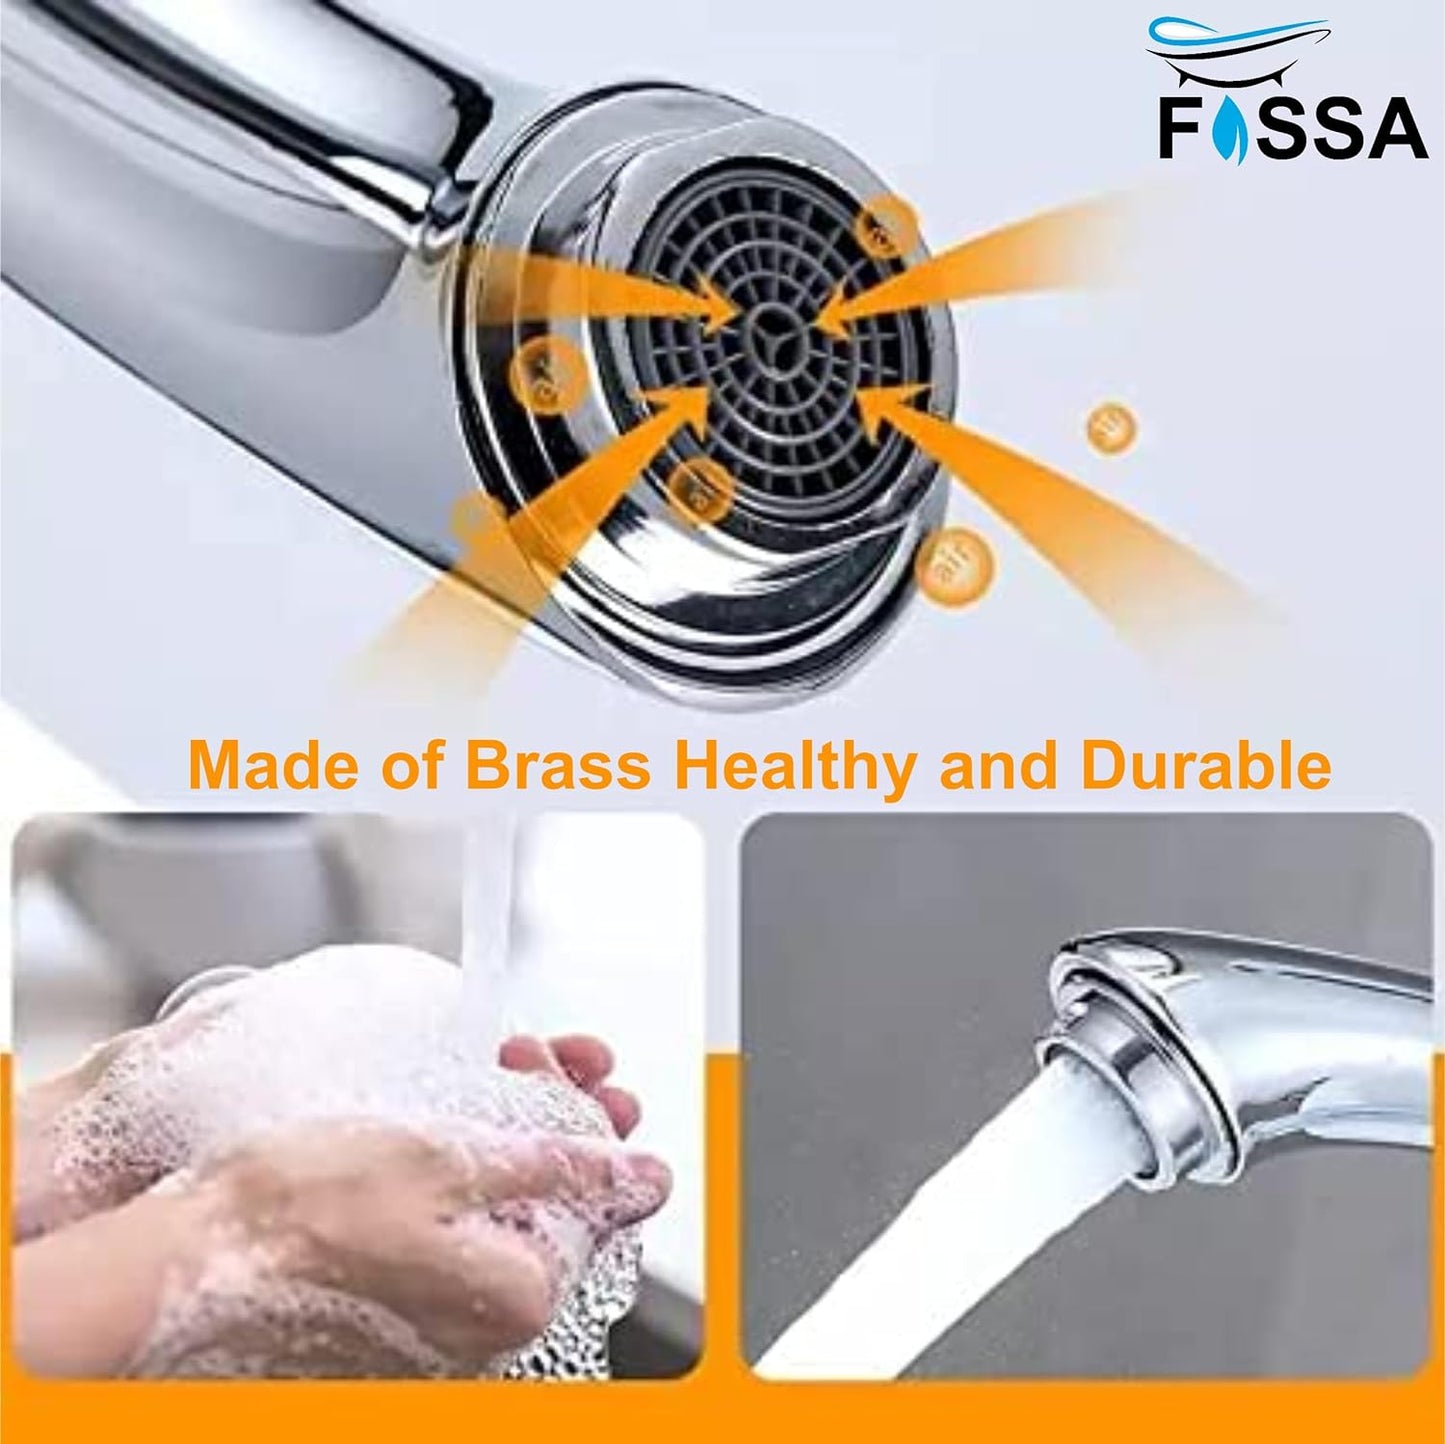 Fossa Brass Single Lever Basin Faucets Sink Tap Deck Mounted Washbasin Single Hole Single Handle Mixer Tap Hot & Cold Water Bathroom Accessories (Chrome Finish)